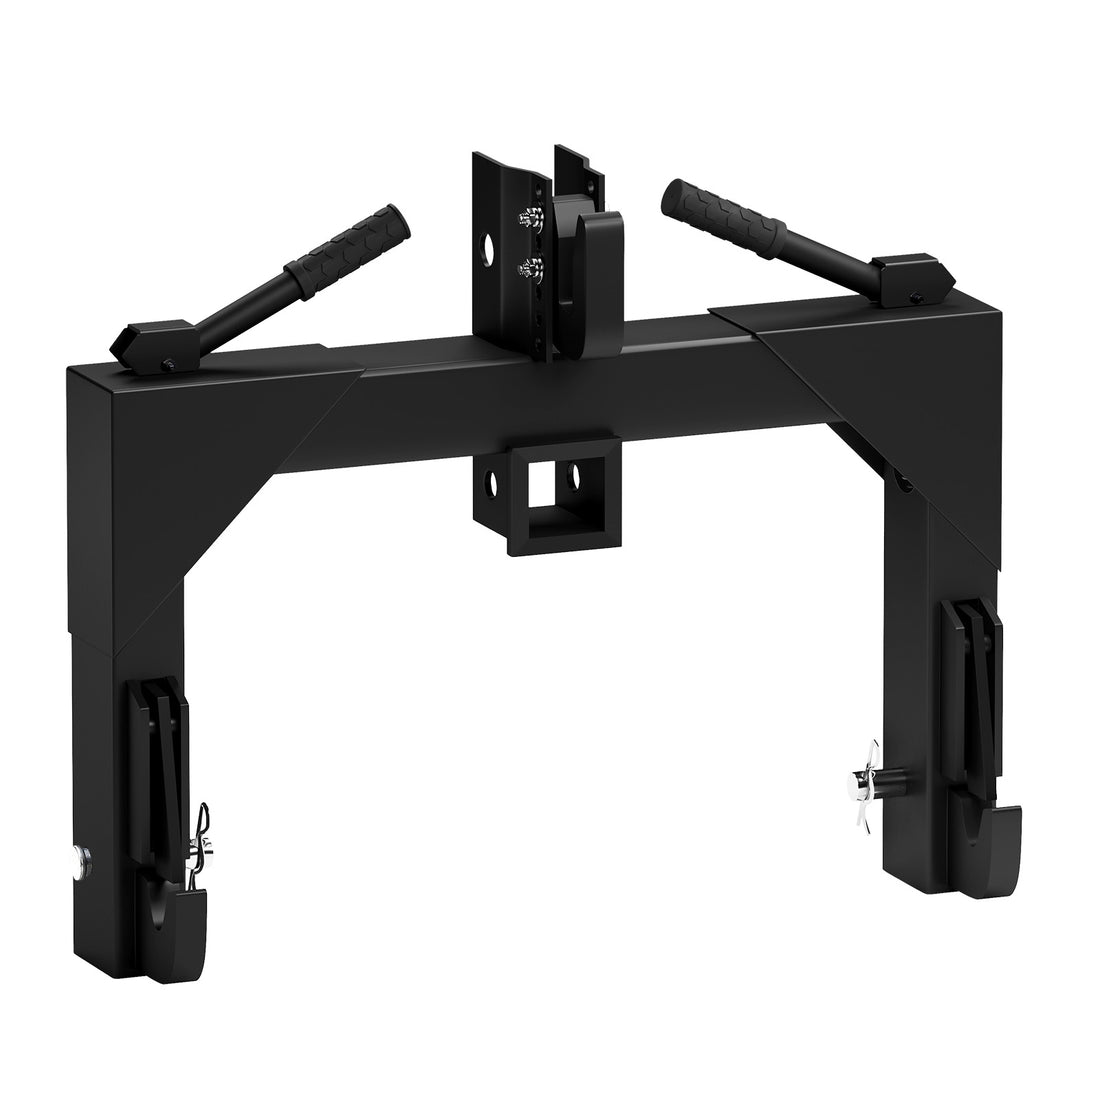 3 Point Quick Hitch, Adaptor to Category 1 and 2 Tractors, 3000 lbs 3-Point Attachments with 2" Receiver Hitch, 28" Between Lower Arms, 15" ~18" Level Adjustment, Black